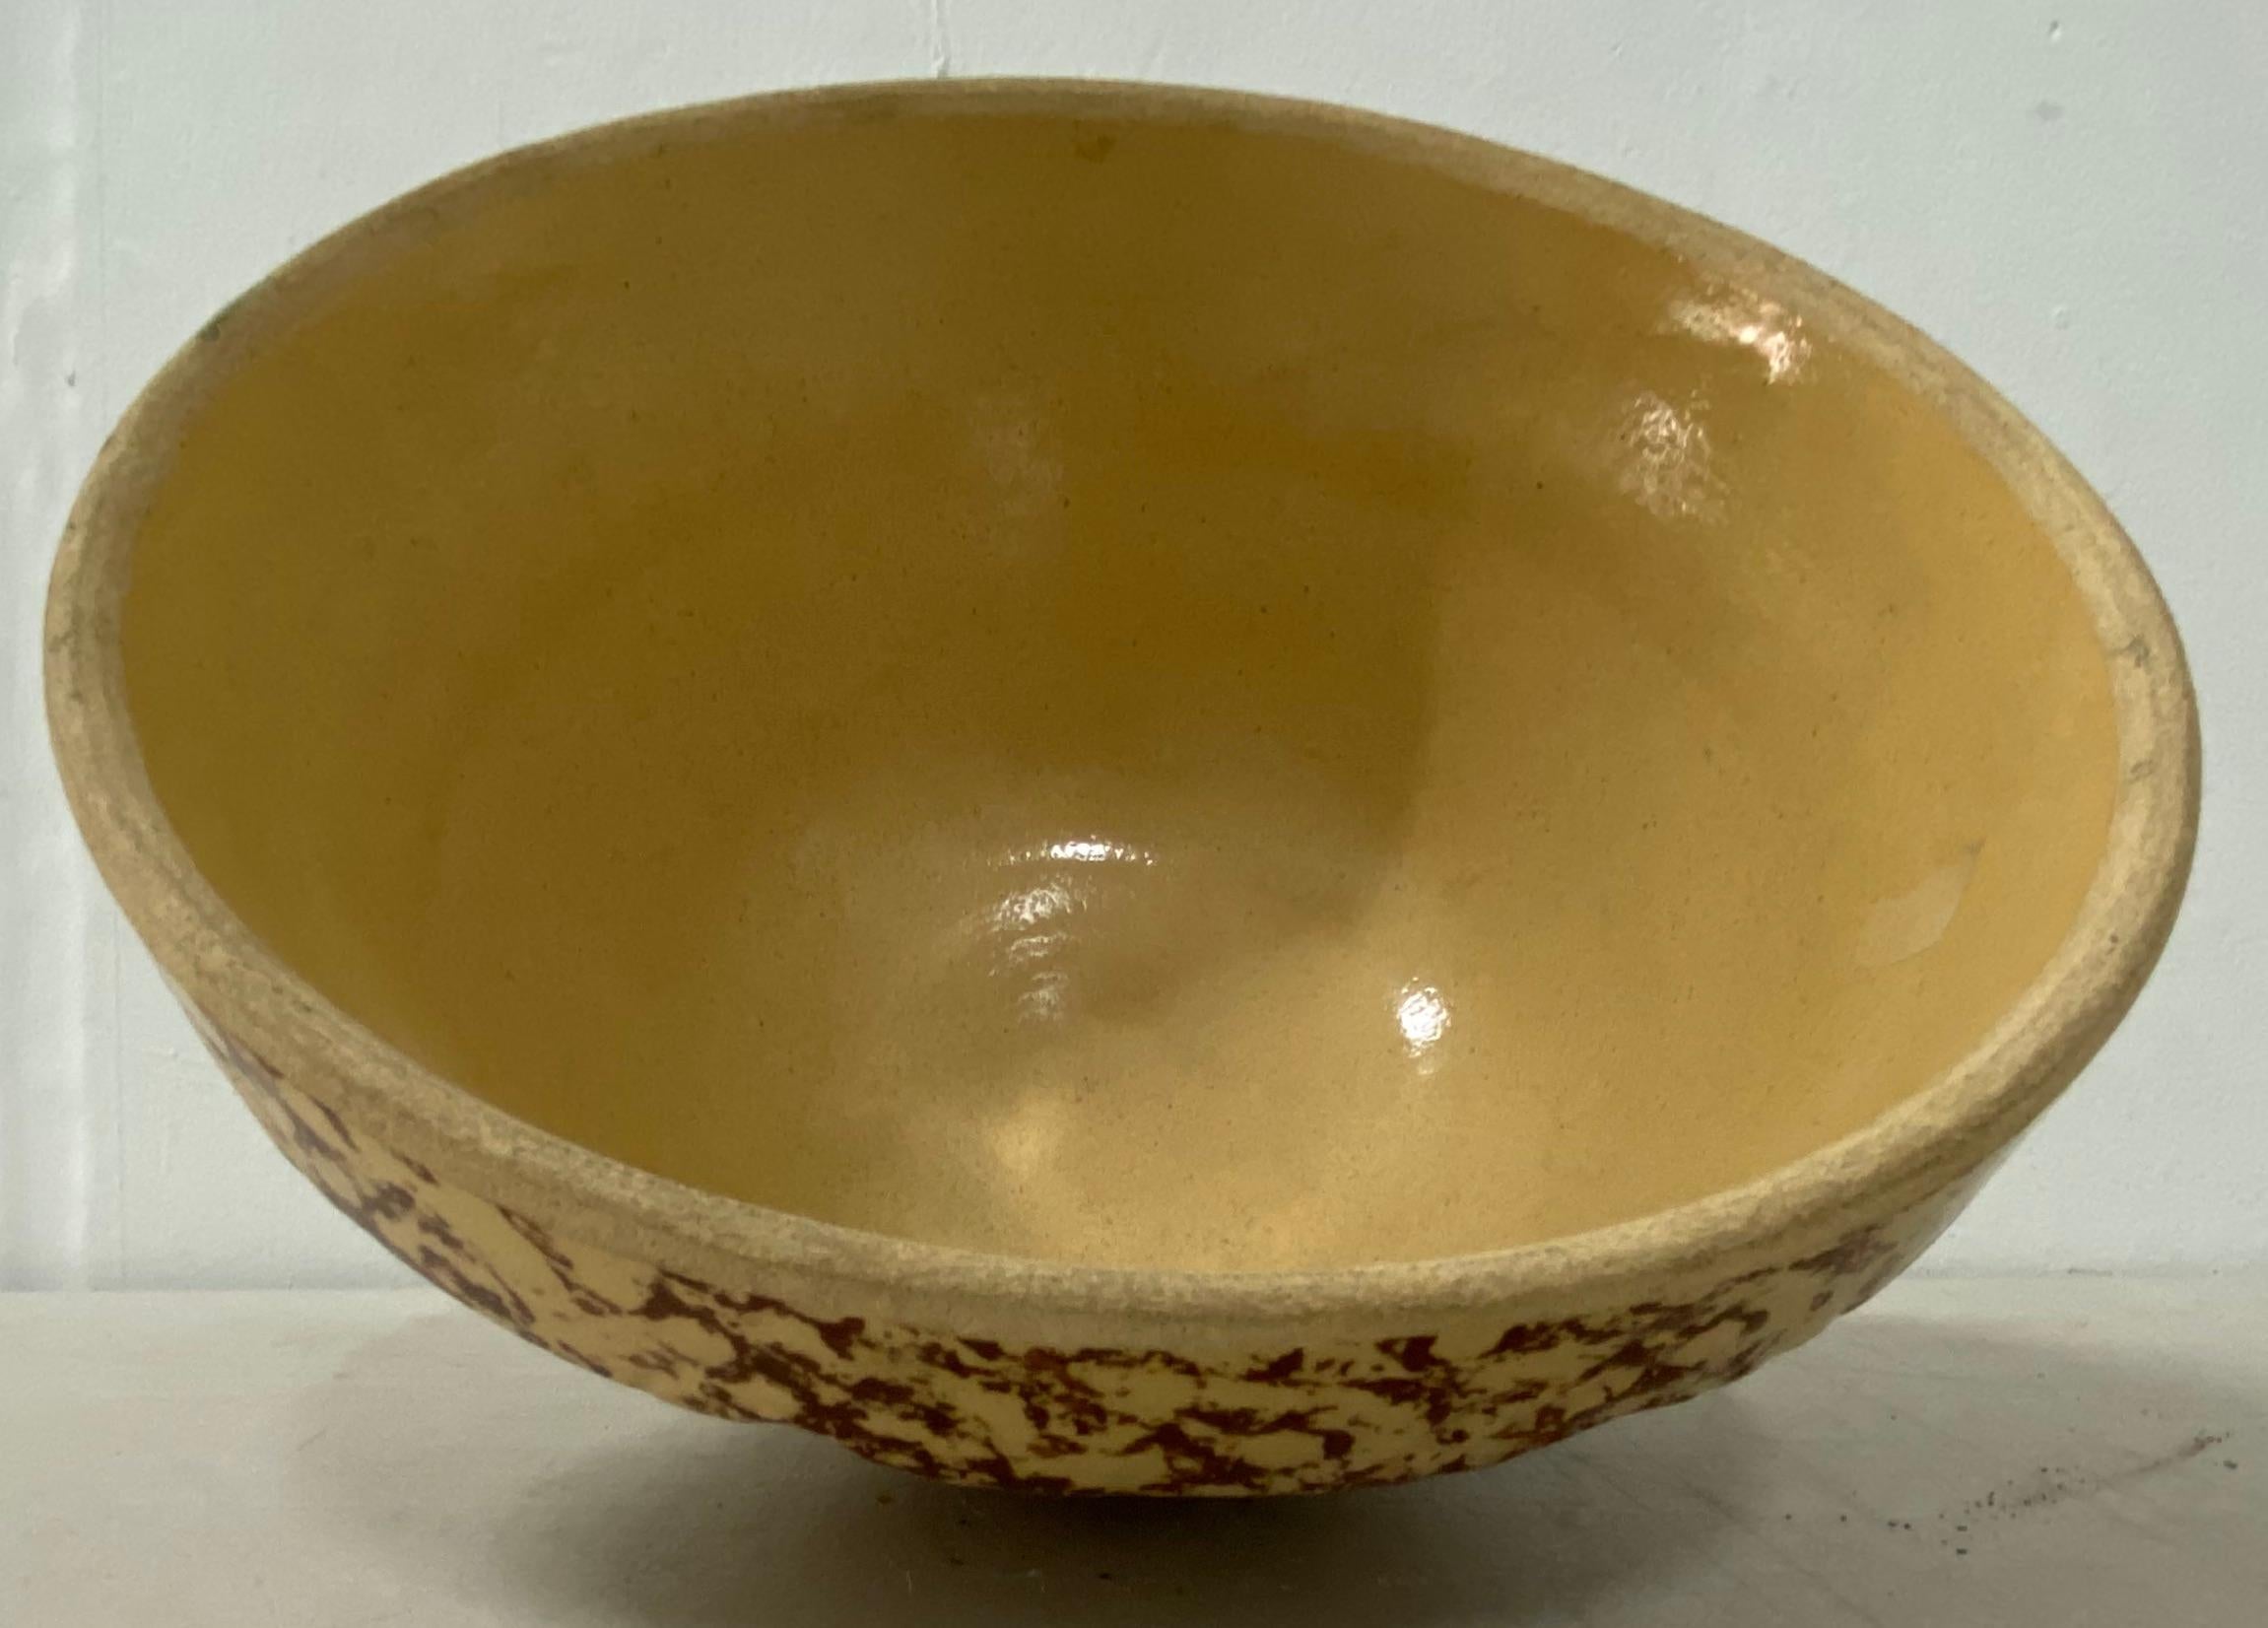 Arts and Crafts Early 20th Century Spongeware Stoneware Bowl For Sale